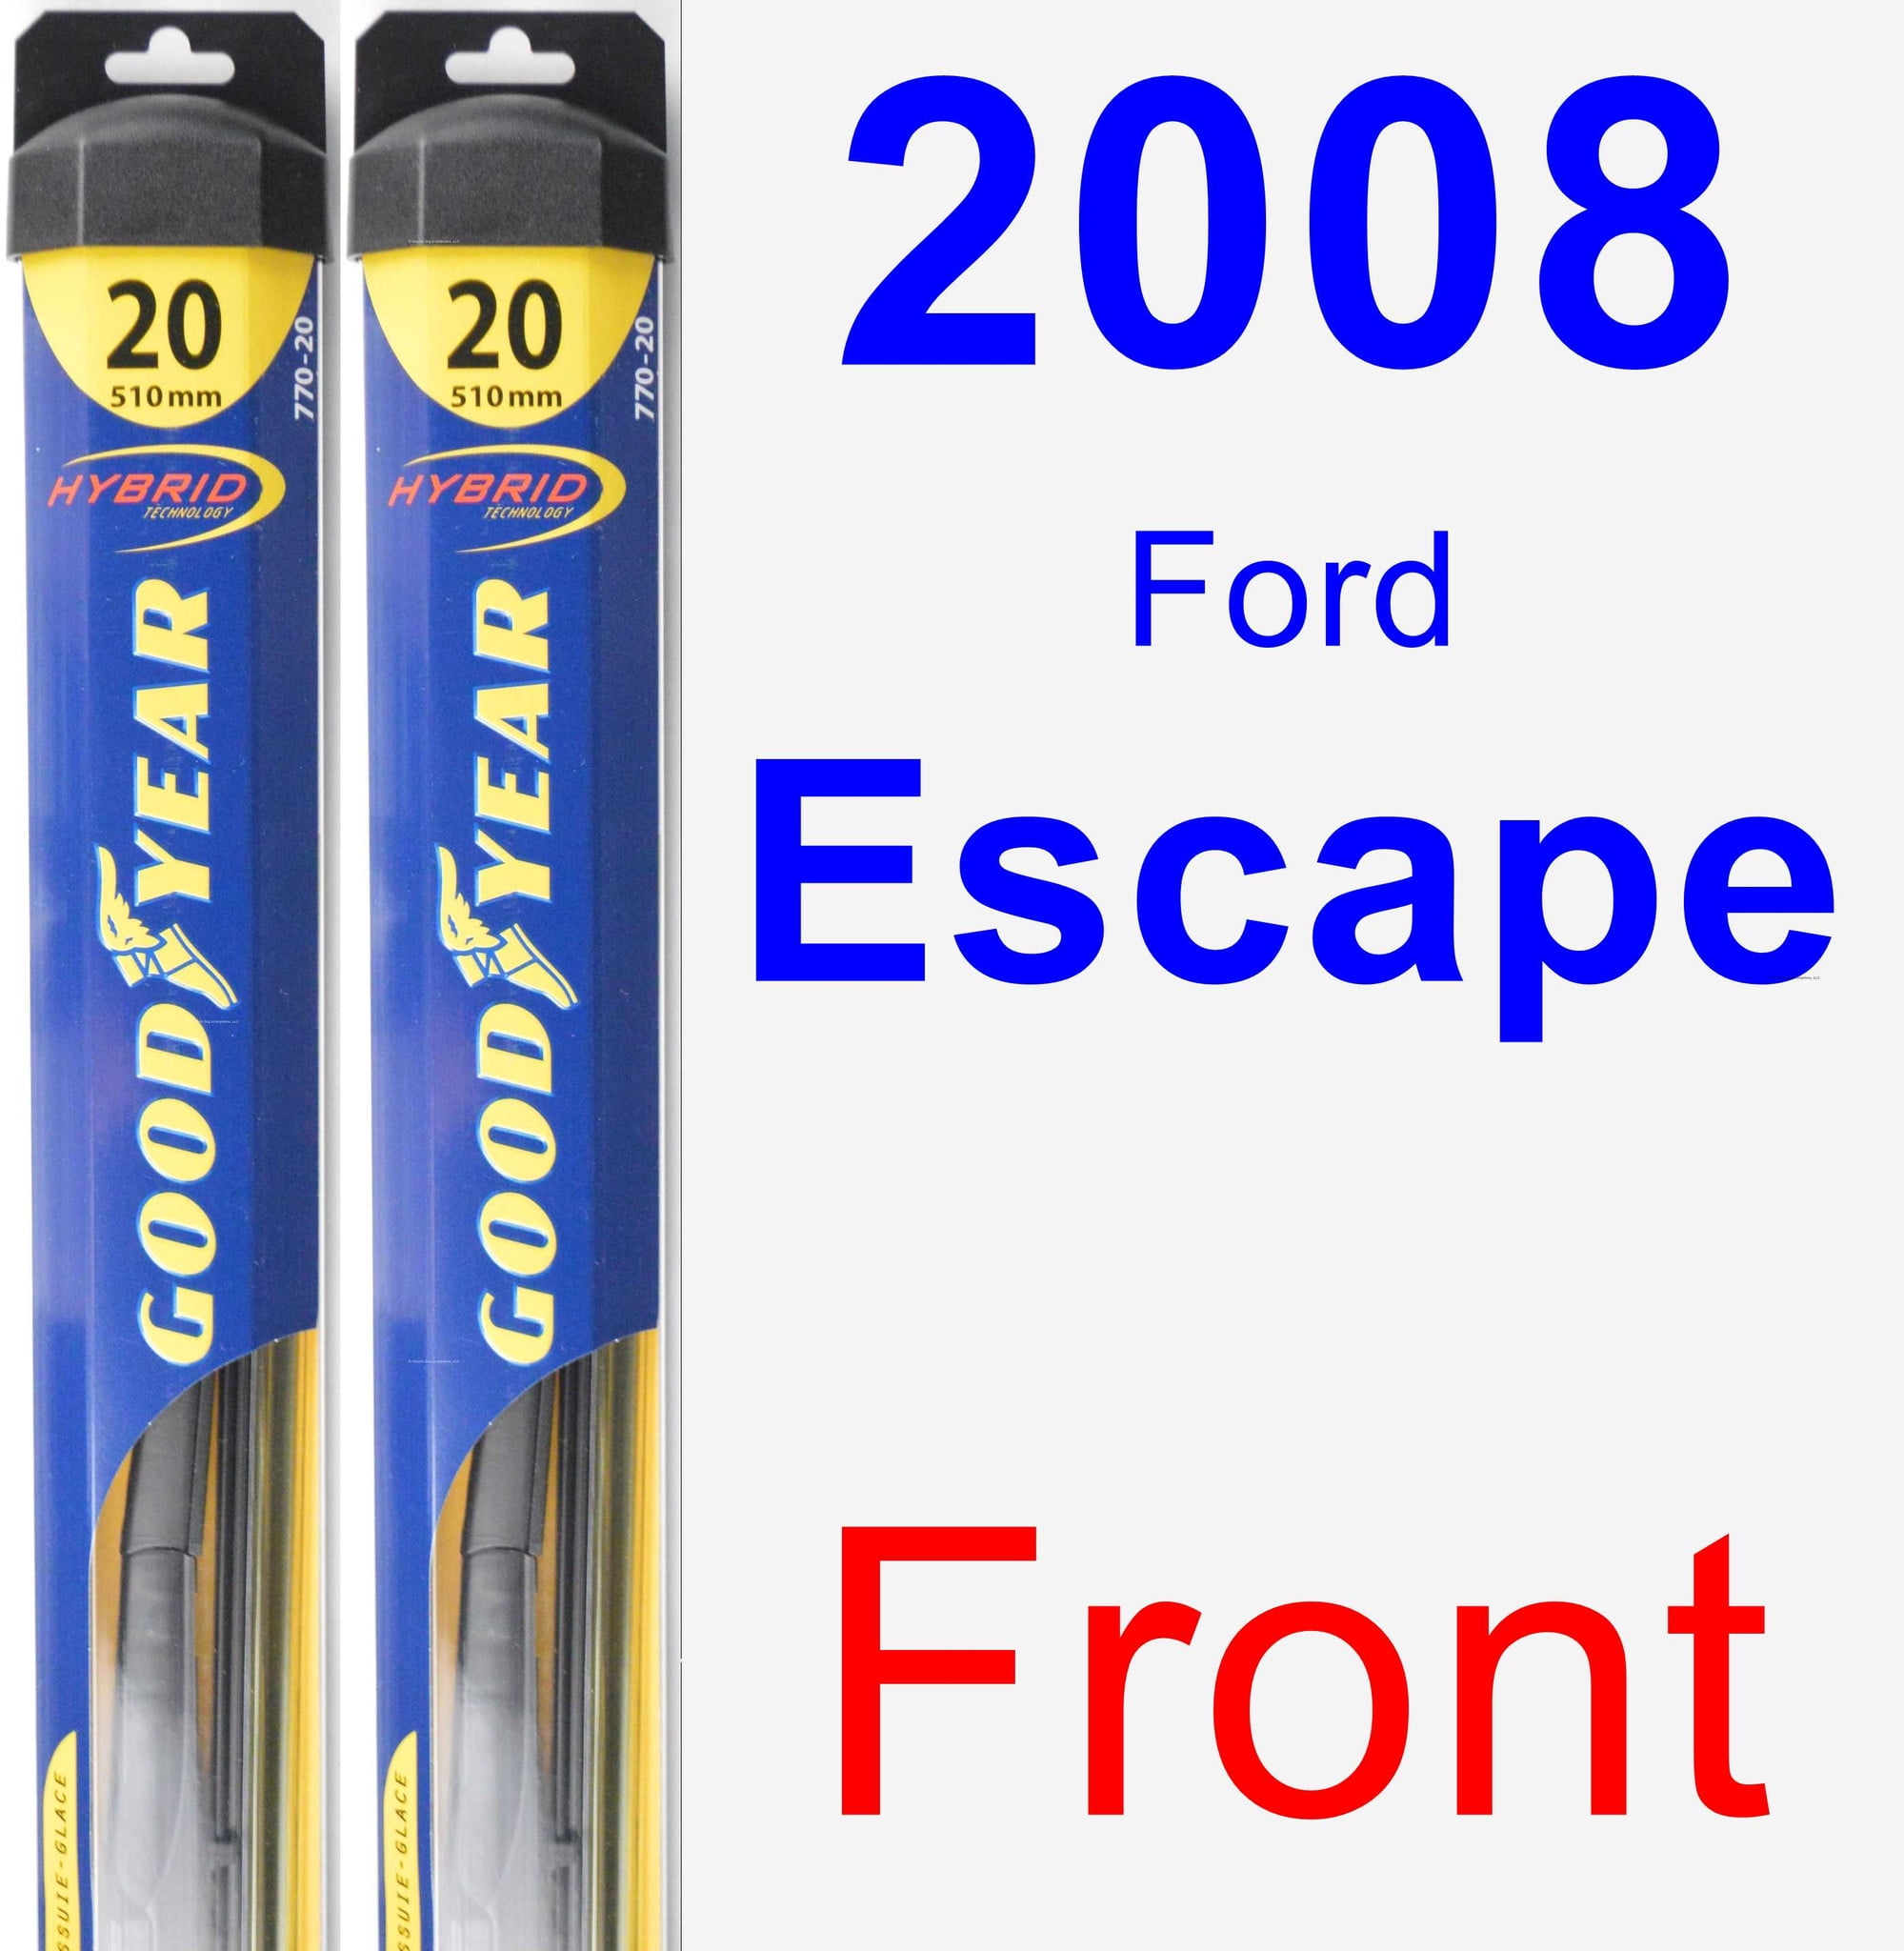 WiperTime ボッシュ ICONビームフロントワイパーブレードキットFord Escape  2008-2012年対応サイズ28